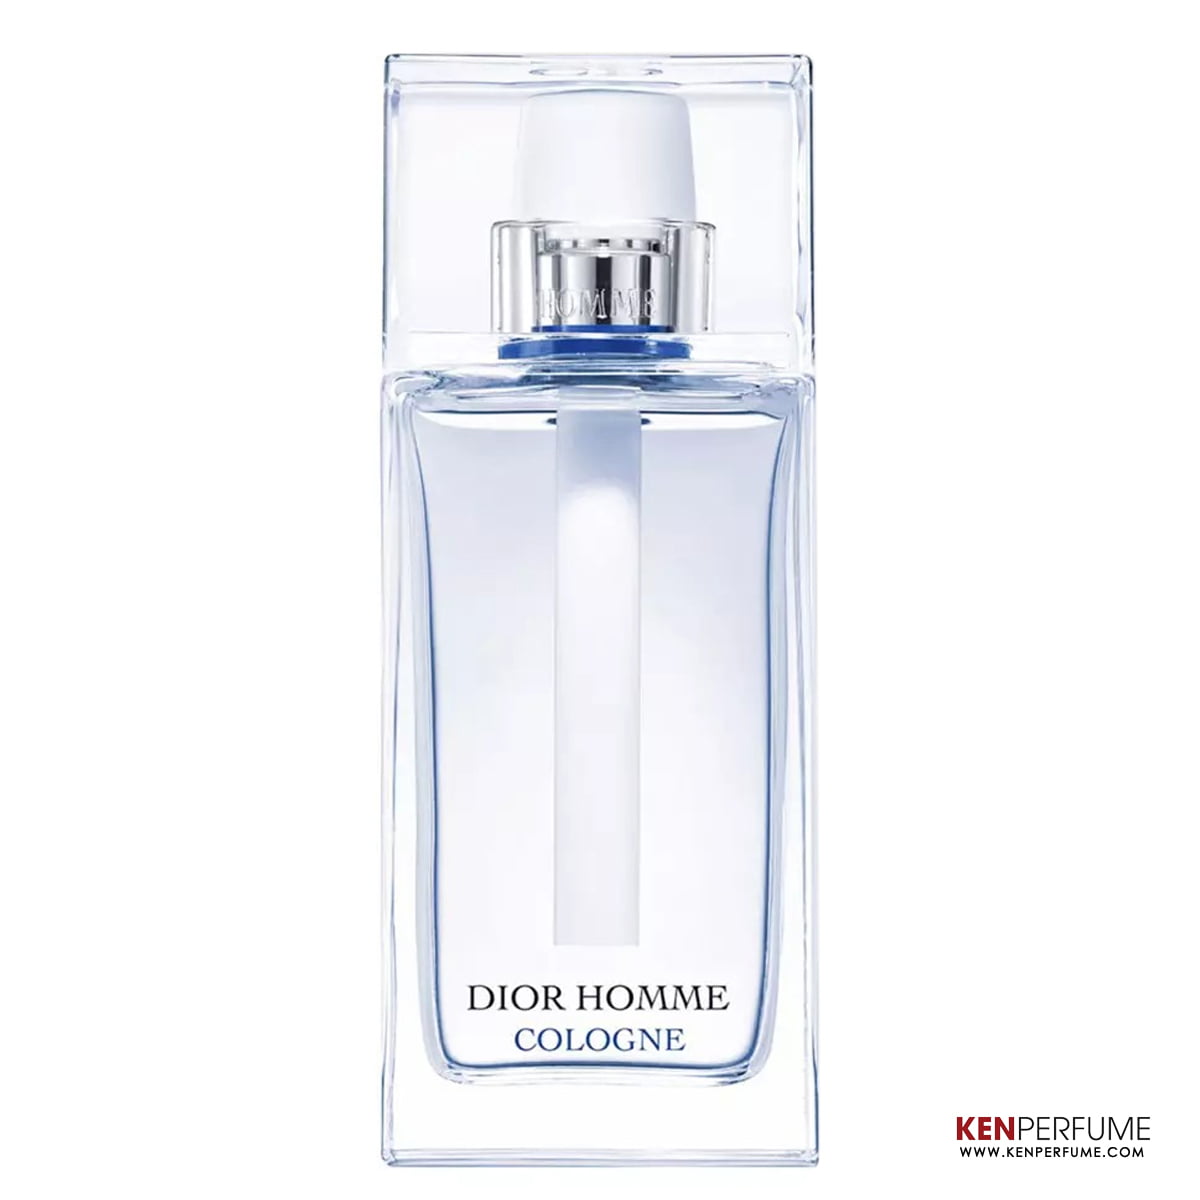 Dior Homme Cologne for Men by Christian Dior in Canada  Perfumeonlineca